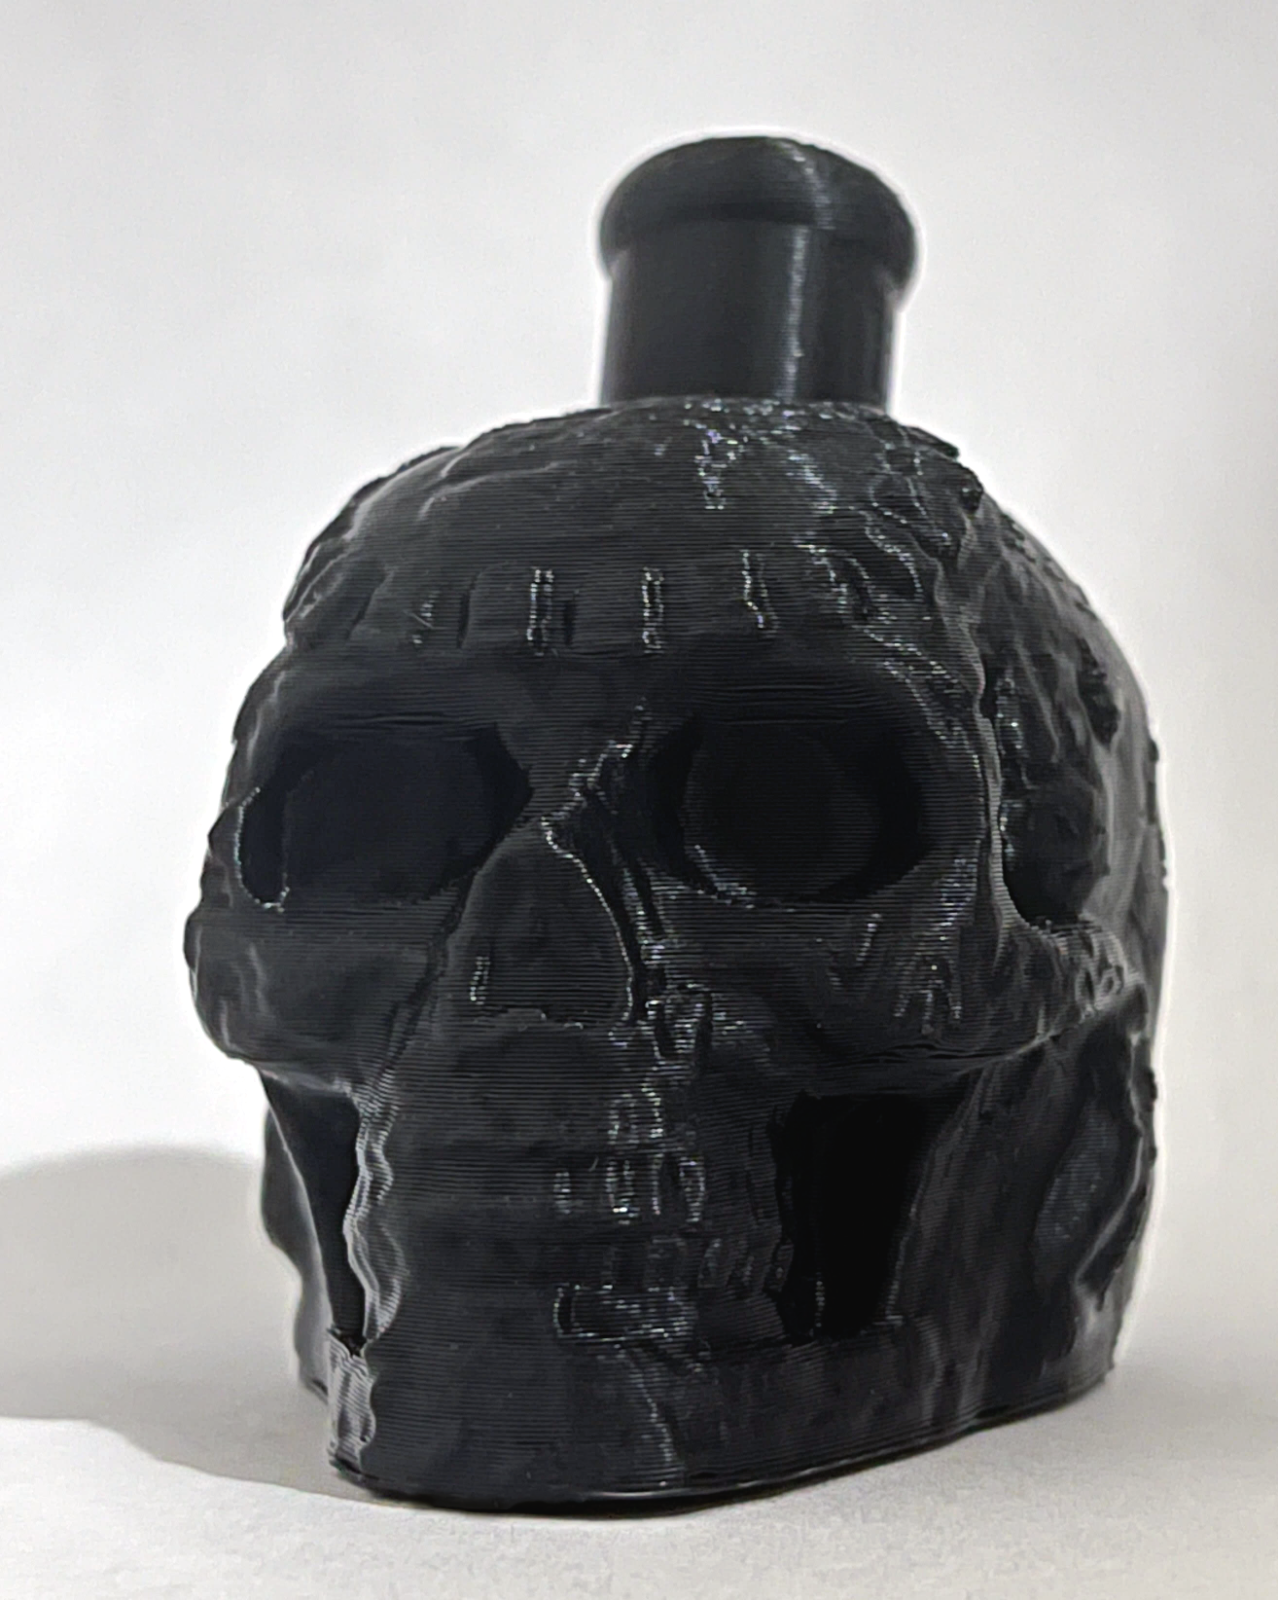 Aztec / Mayan Death Whistle Onyx Black Skull Loud *** Made In Usa ***